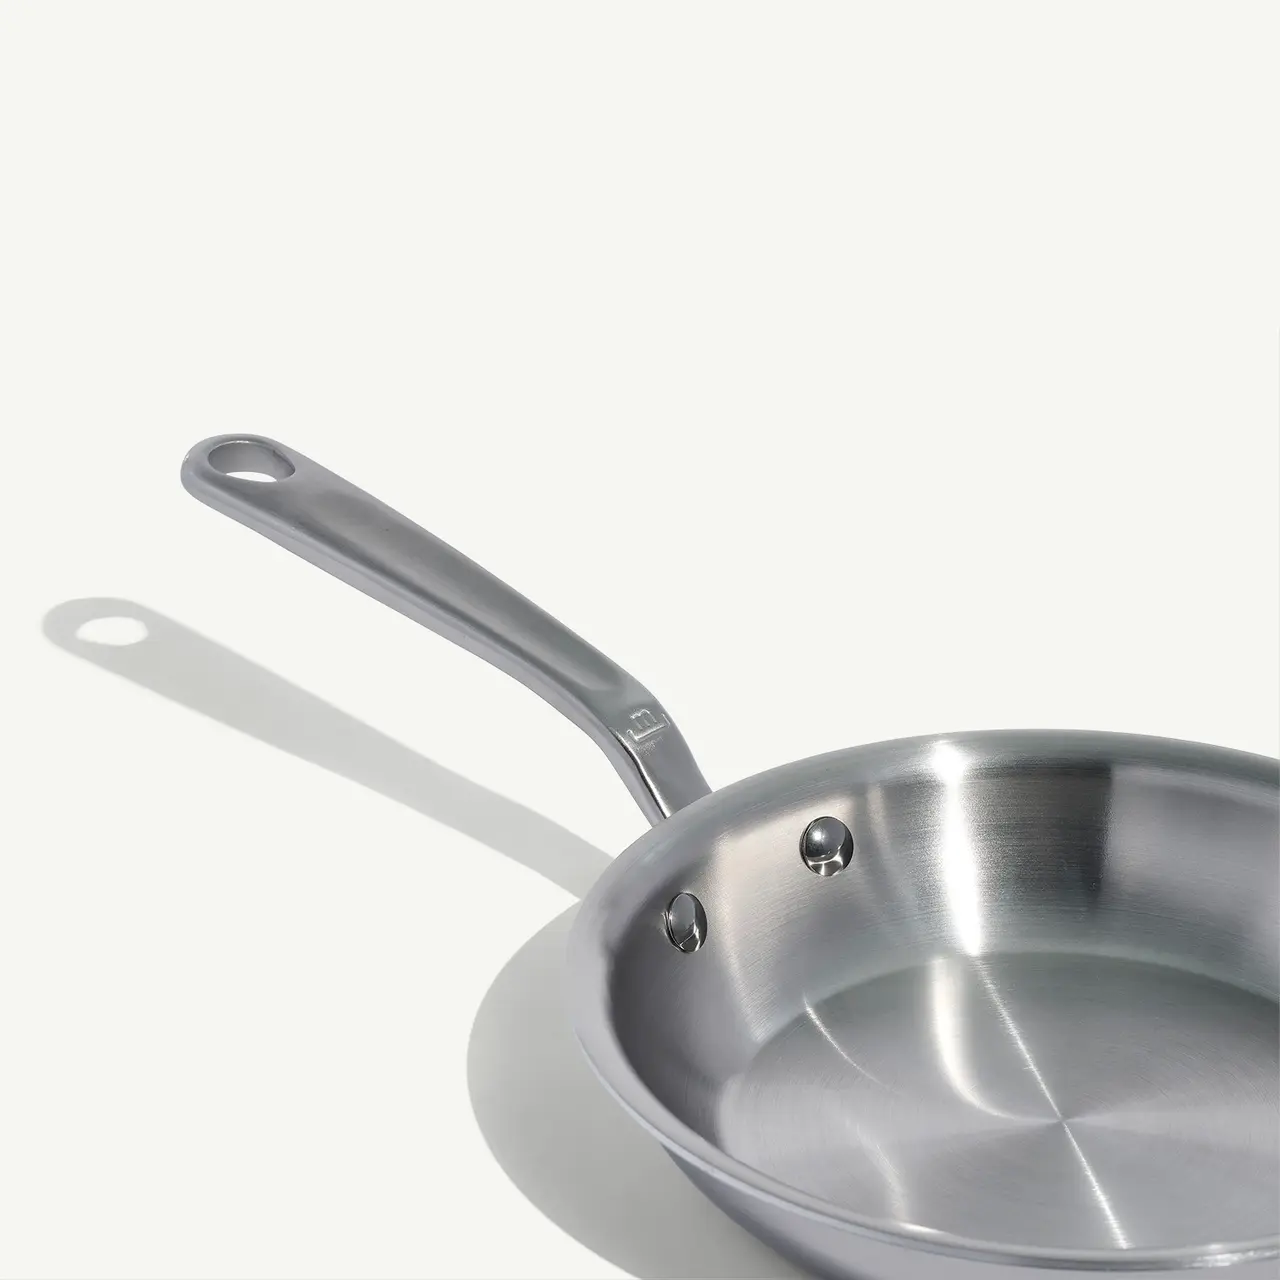 A stainless steel frying pan is positioned on a plain background, casting a soft shadow to the right.